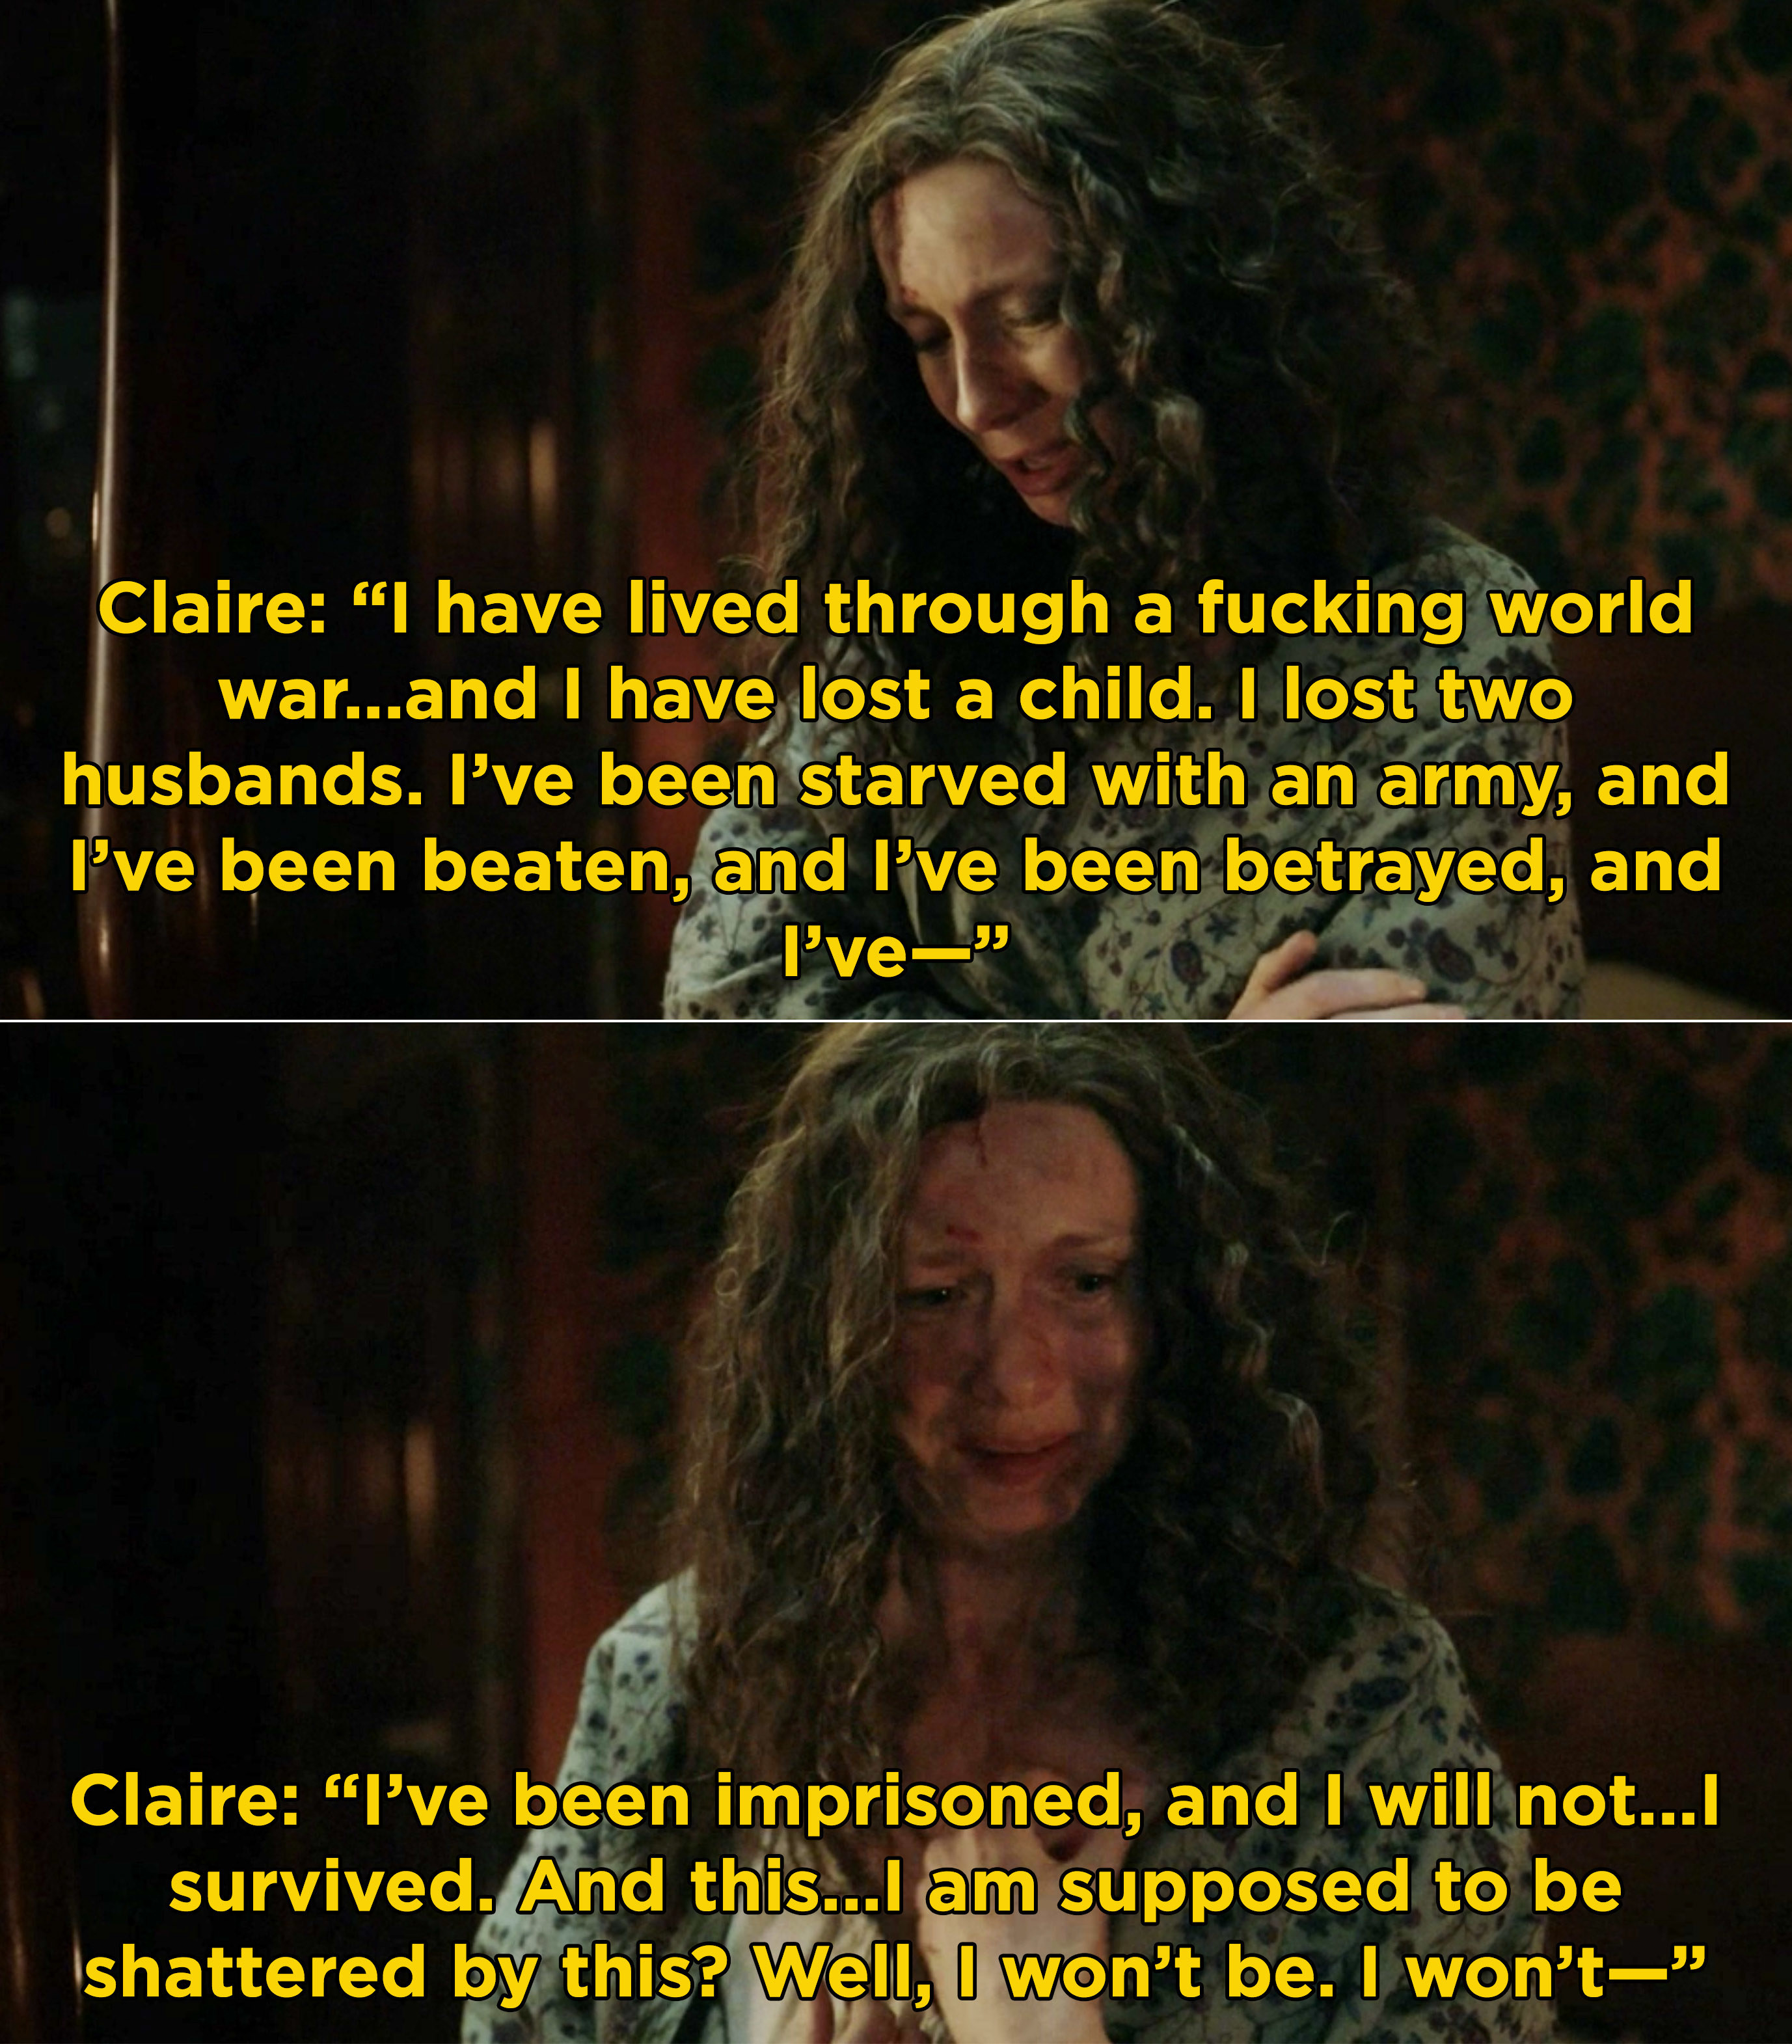 Claire listing off everything she&#x27;s been through and saying she won&#x27;t be &quot;shattered&quot; by this